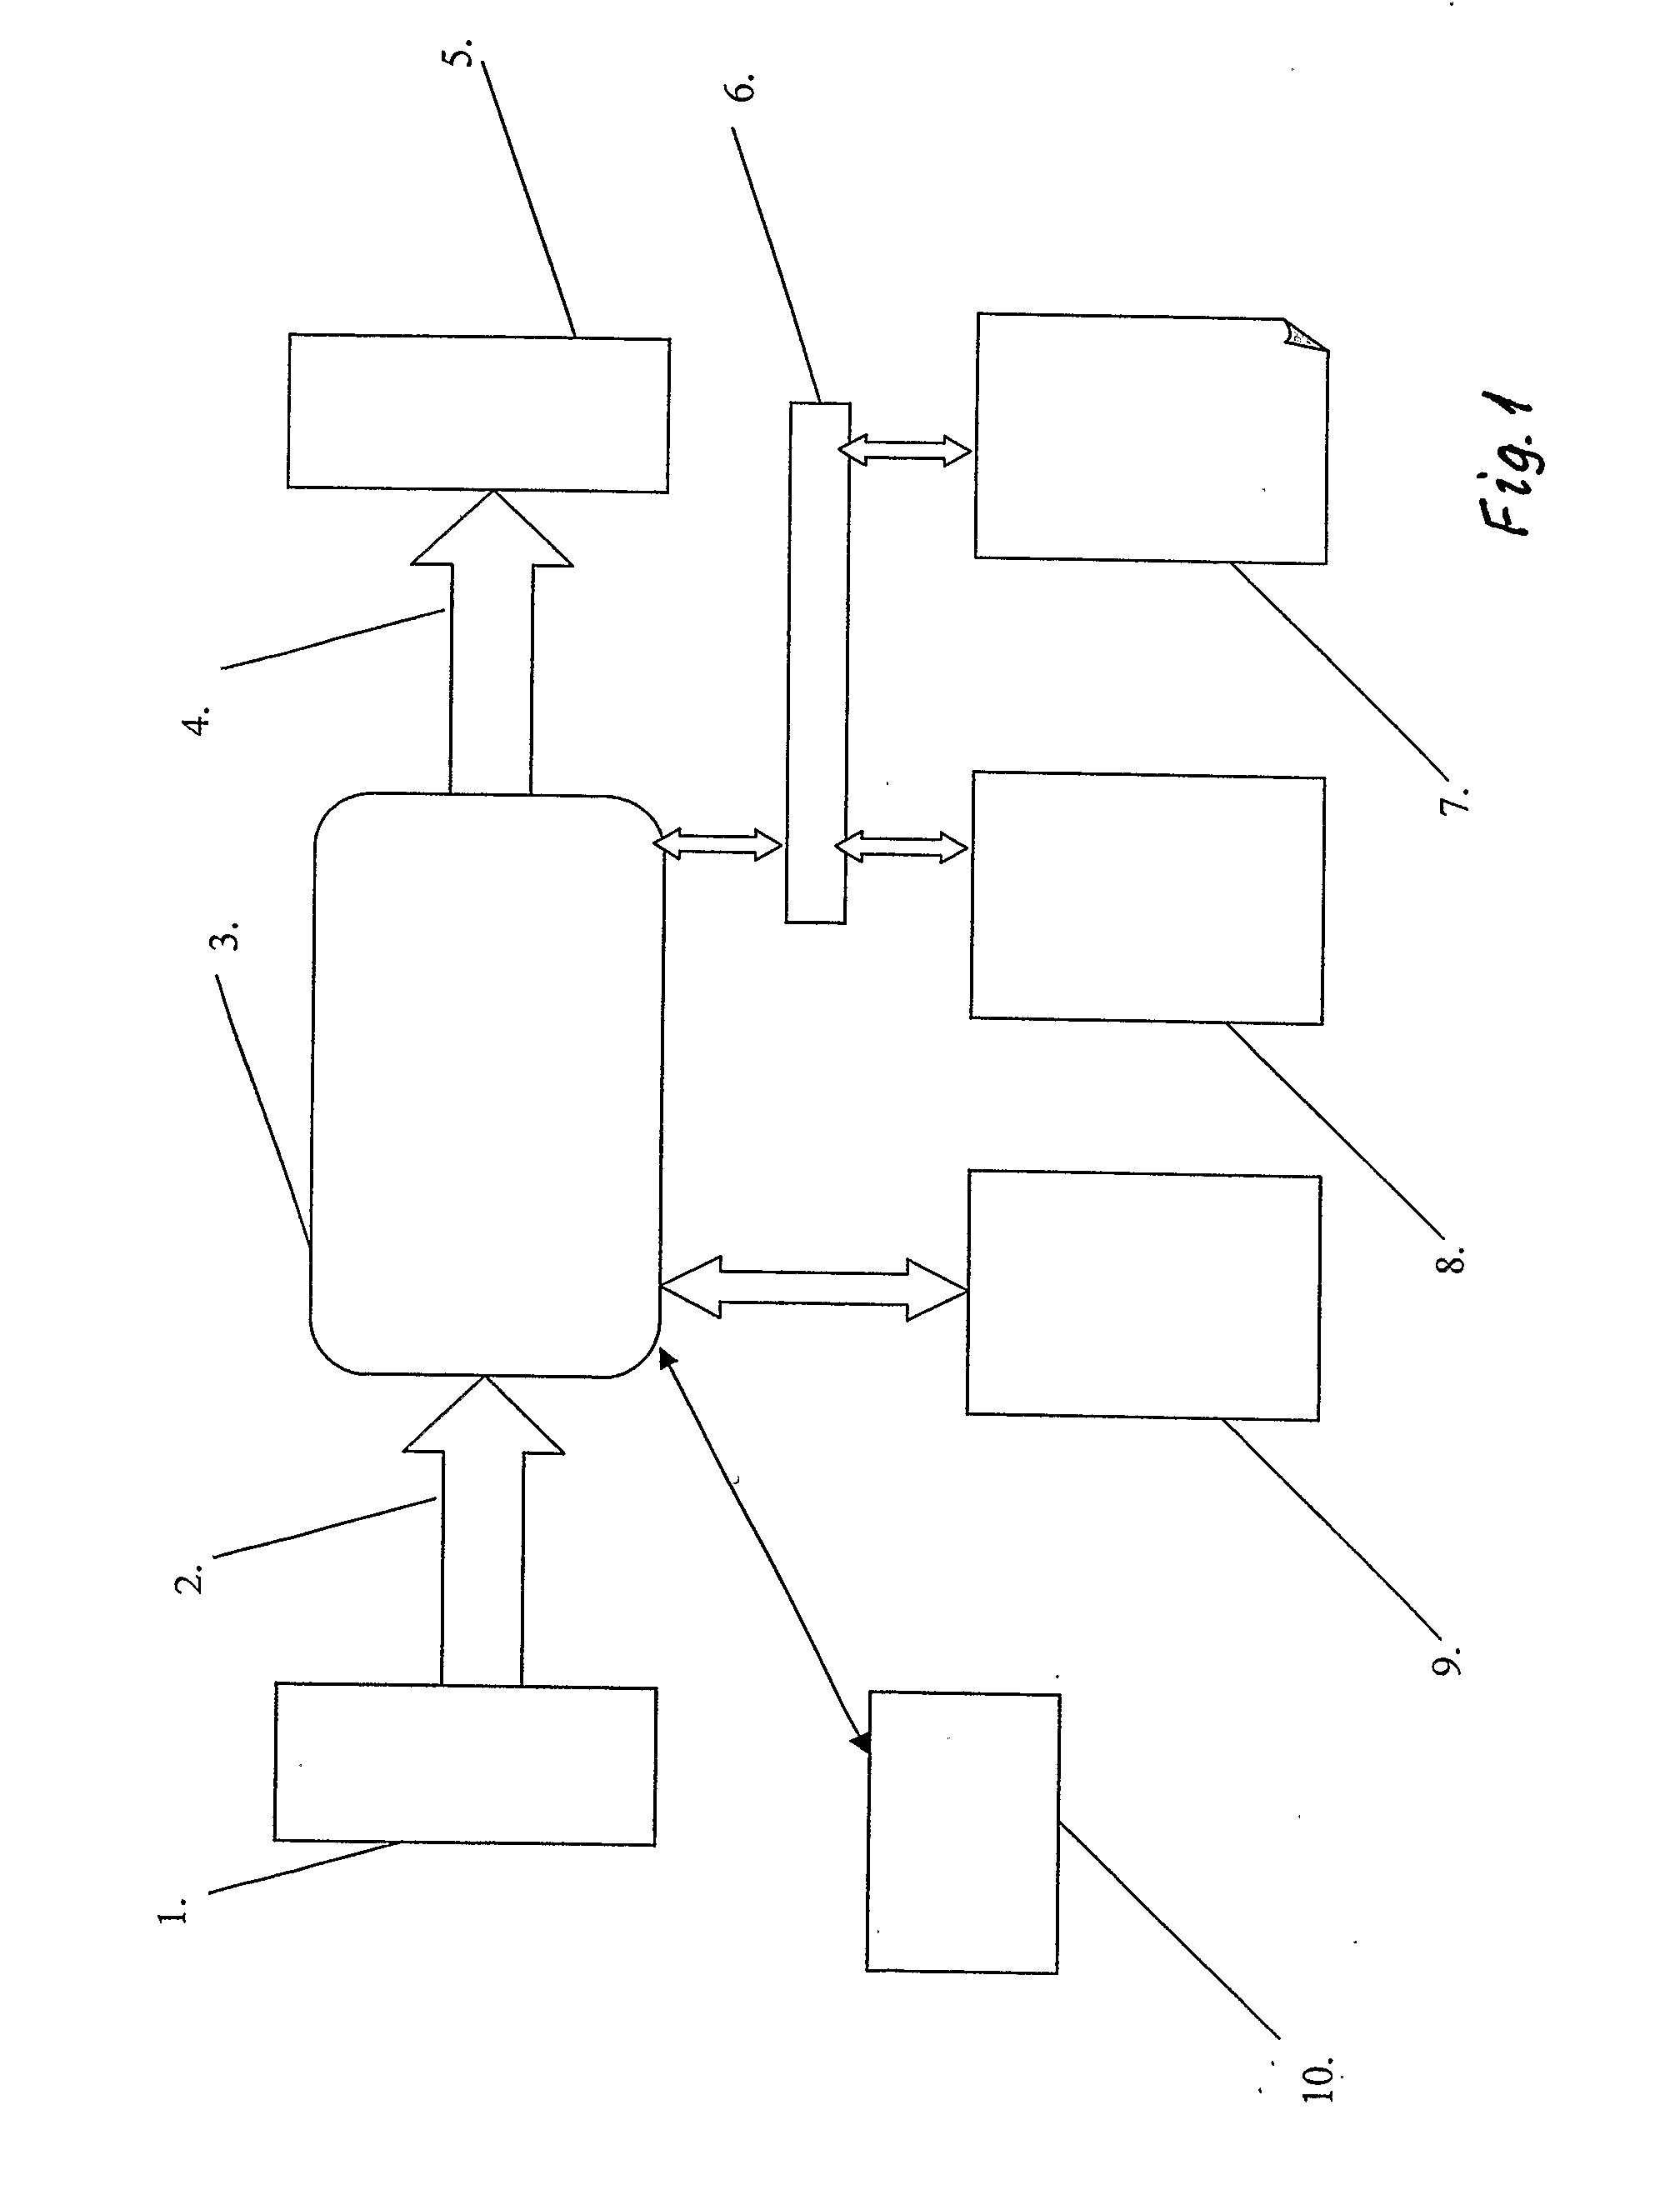 Symmetric key cryptographic method and apparatus for information encryption and decryption